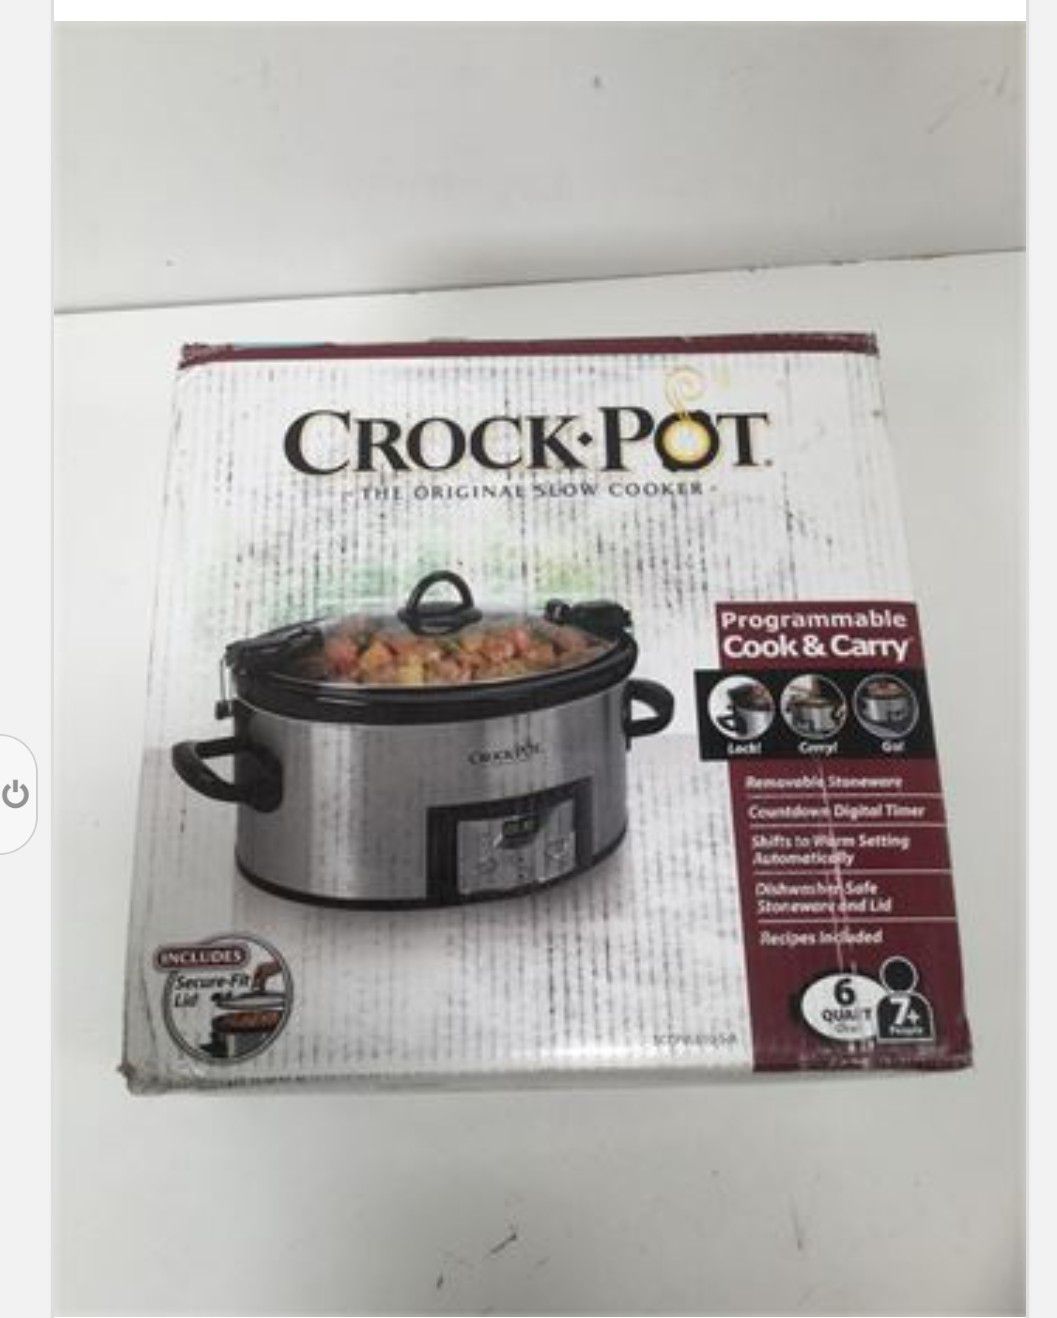 Cook & Carry: Crock-Pot SCCPVL610-S 6-Quart Programmable Cook and Carry